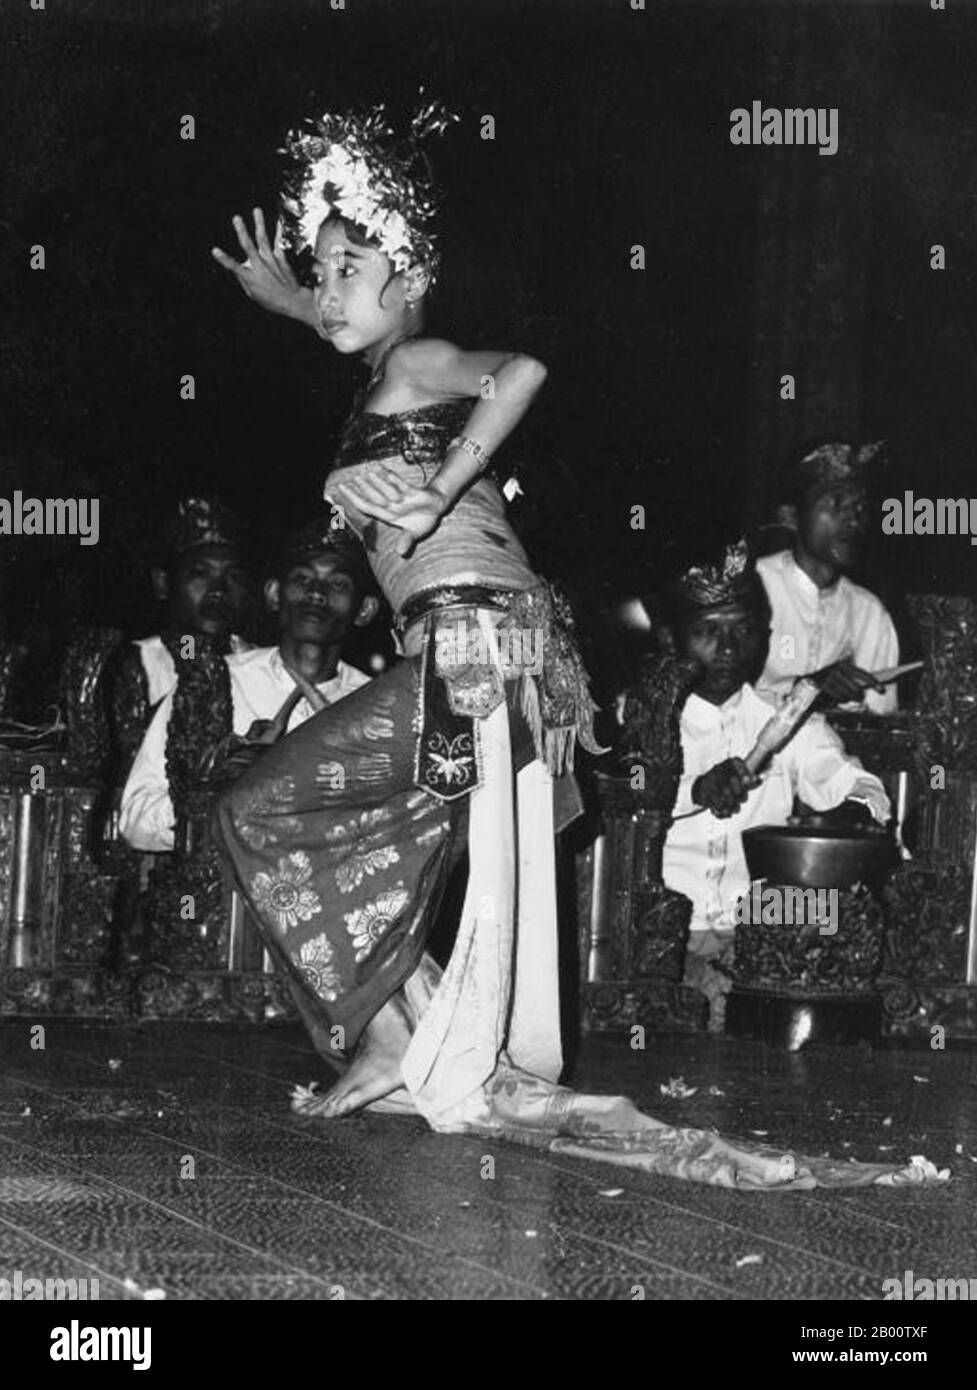 Indonesia: A legong dancer performs on the Island of Bali. Photo by Boy Lawson (1925-1992),1971 (Tropenmuseum, part of the National Museum of World Cultures, CC BY-SA 3.0 License).  Bali is home to most of Indonesia's small Hindu minority with some 92% of the island’s 4 million population adhering to Balinese Hinduism, while most of the remainder follow Islam.   Bali is the largest tourist destination in Indonesia, and is renowned for its highly developed arts, including traditional and modern dance, sculpture, painting, leatherwork, metalwork and music. Stock Photo